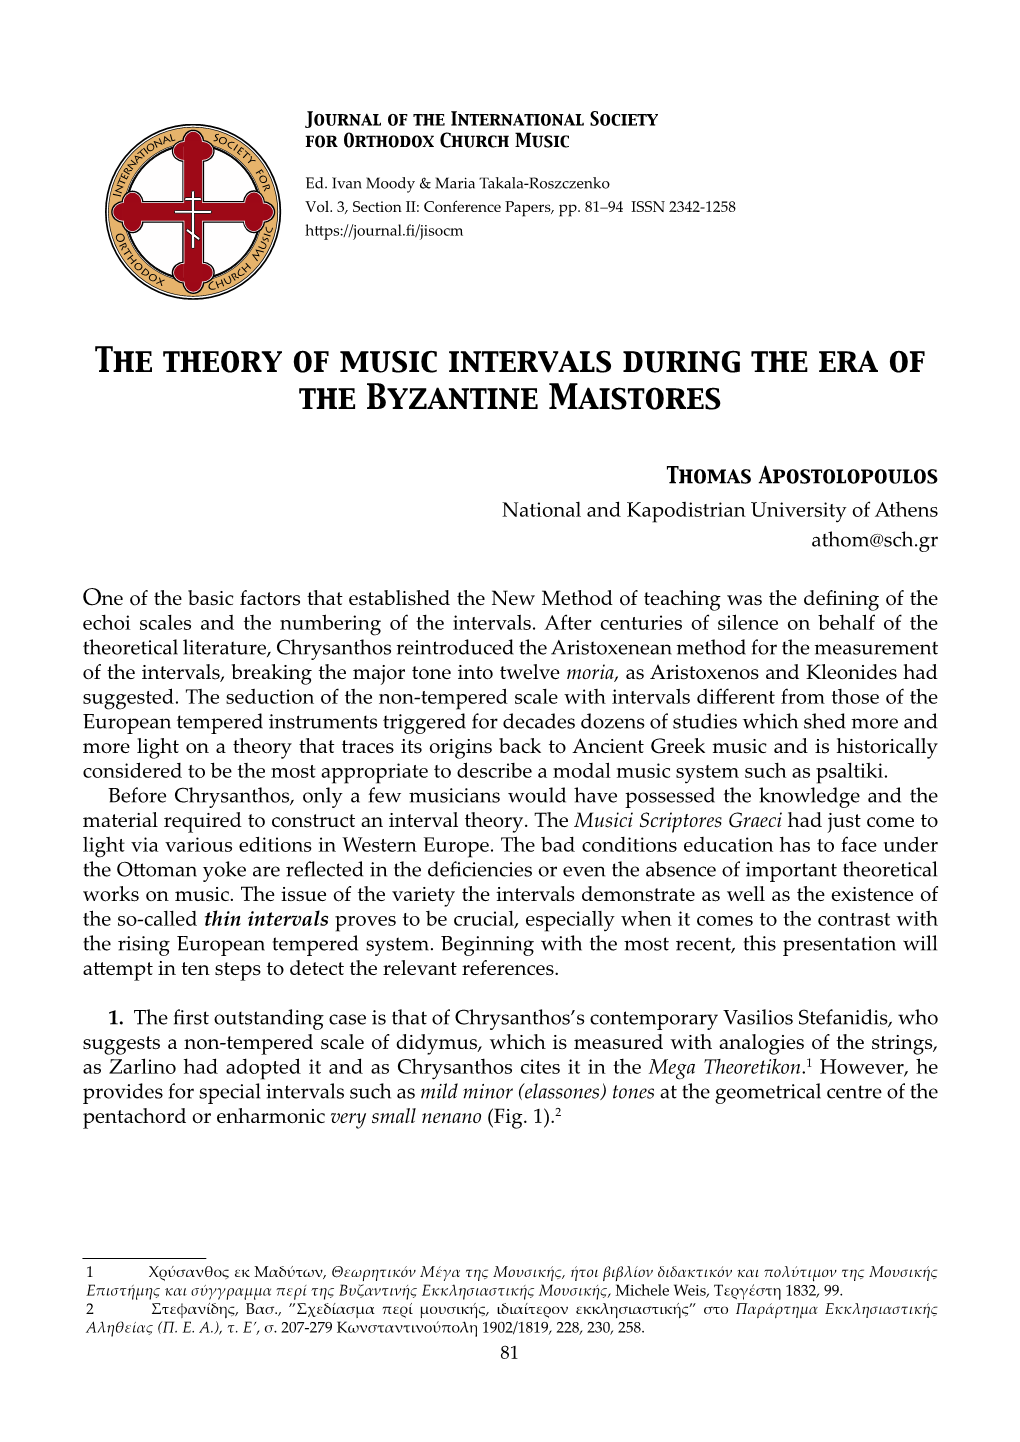 The Theory of Music Intervals During the Era of the Byzantine Maistores